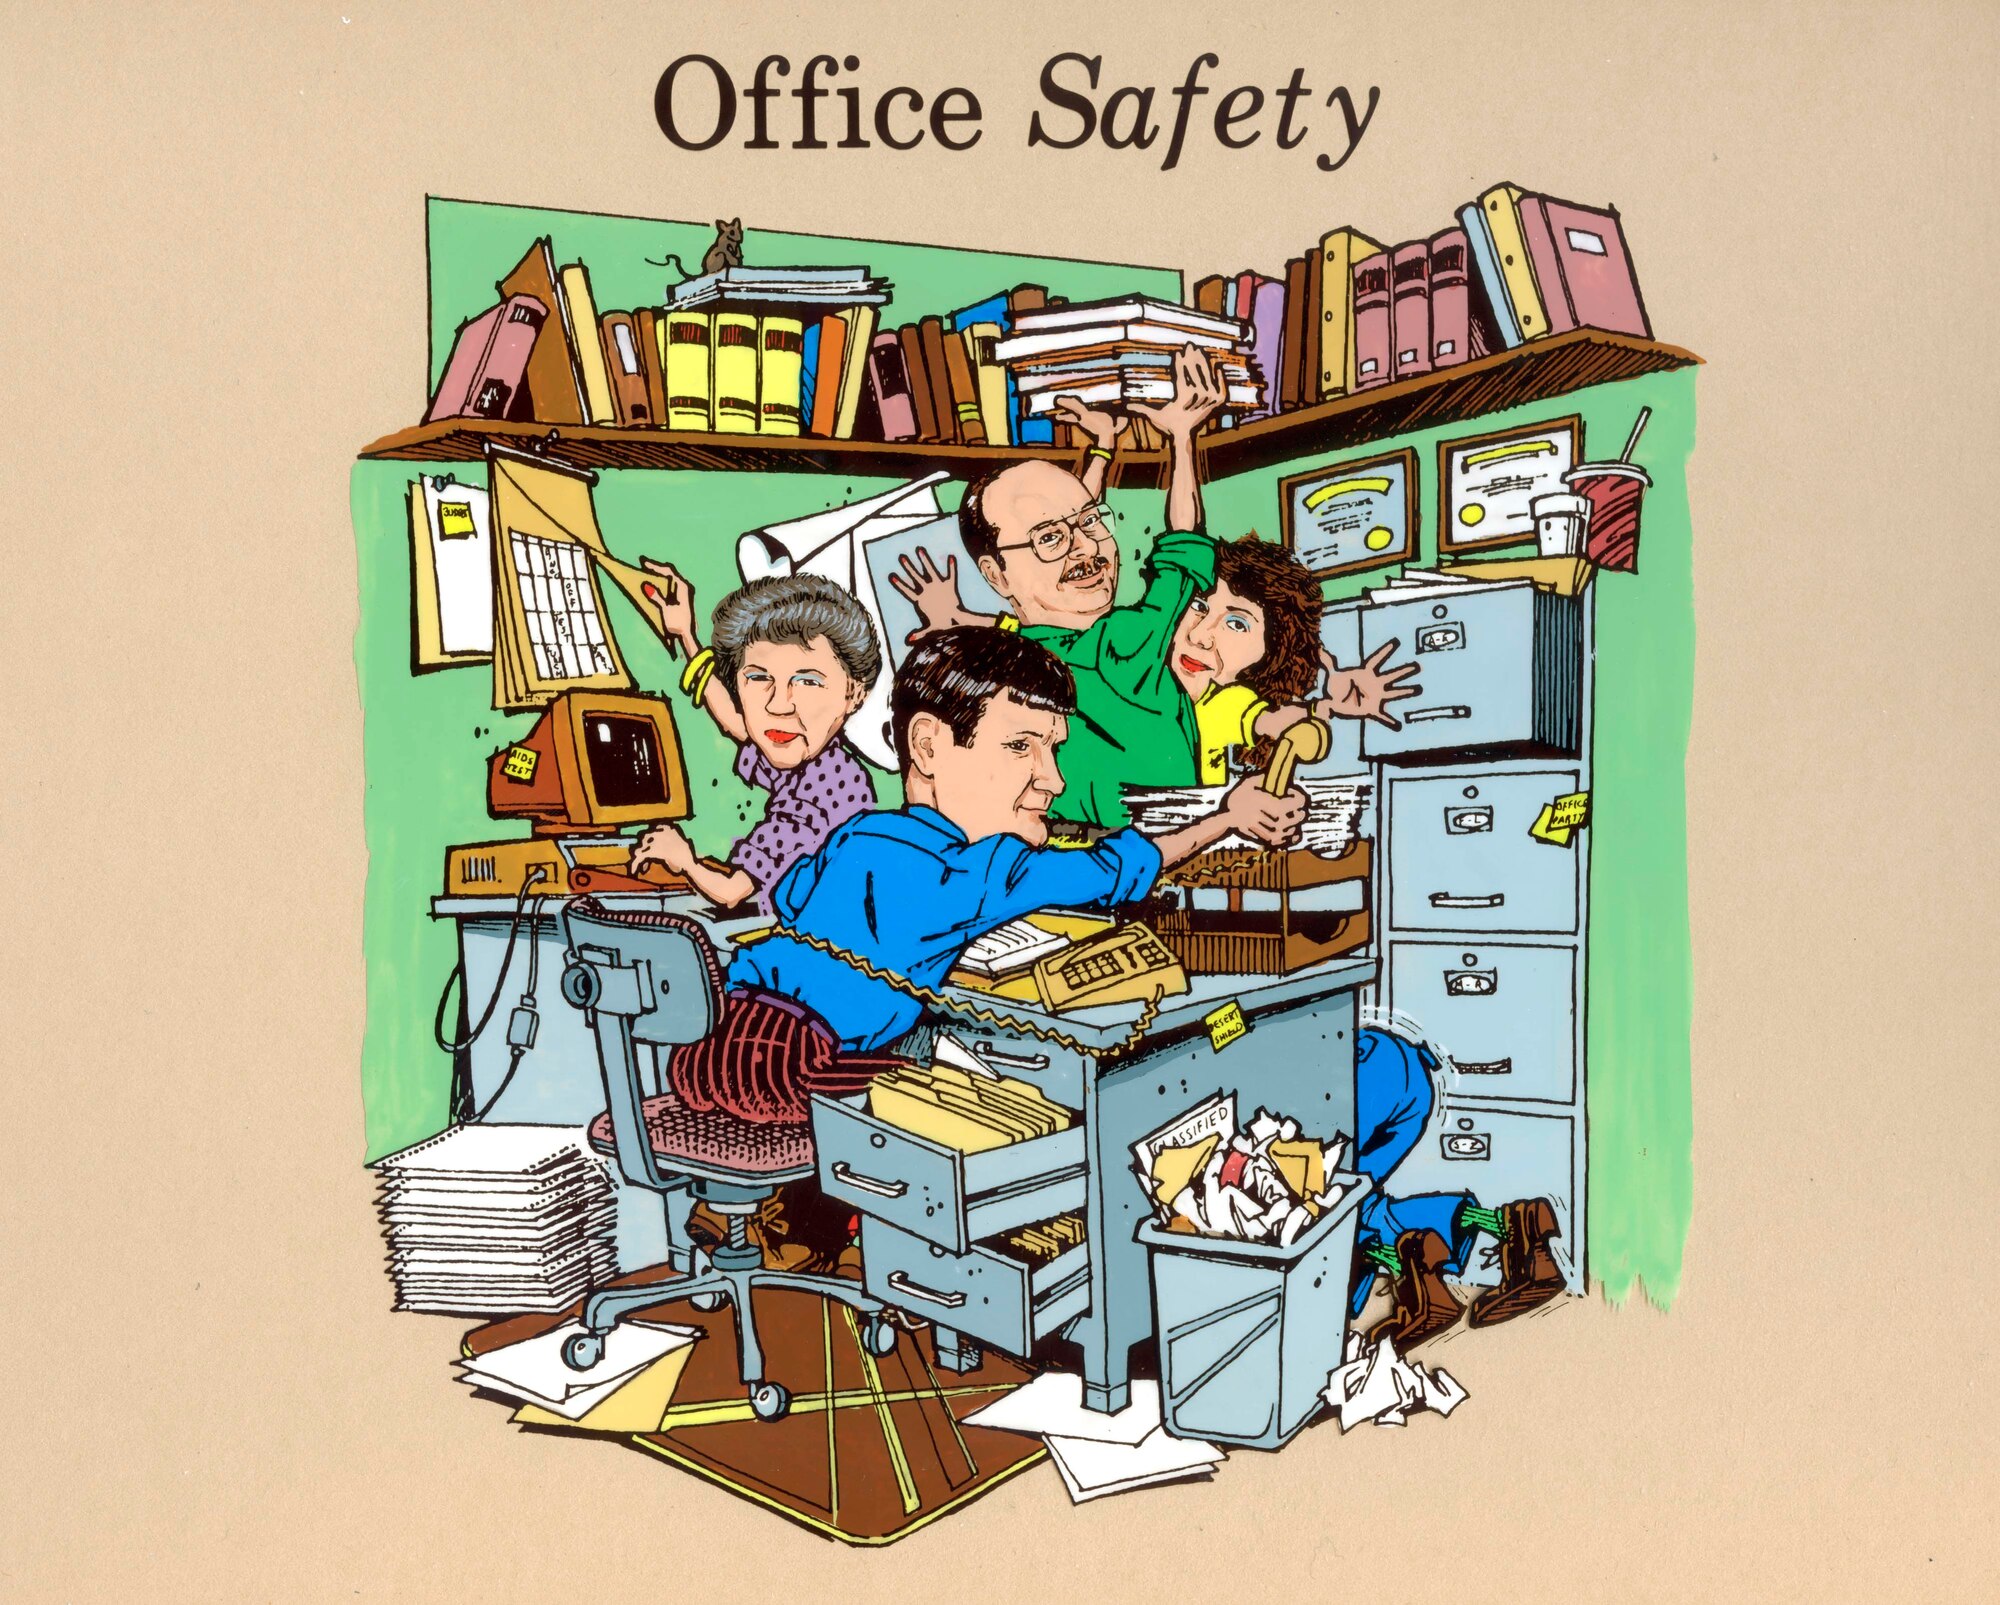 Mr. Zeilman created this “Office Safety” painting in the late 1980’s to liven up safety briefings.  The painting features co-workers Mr. Zeilman had at the time.